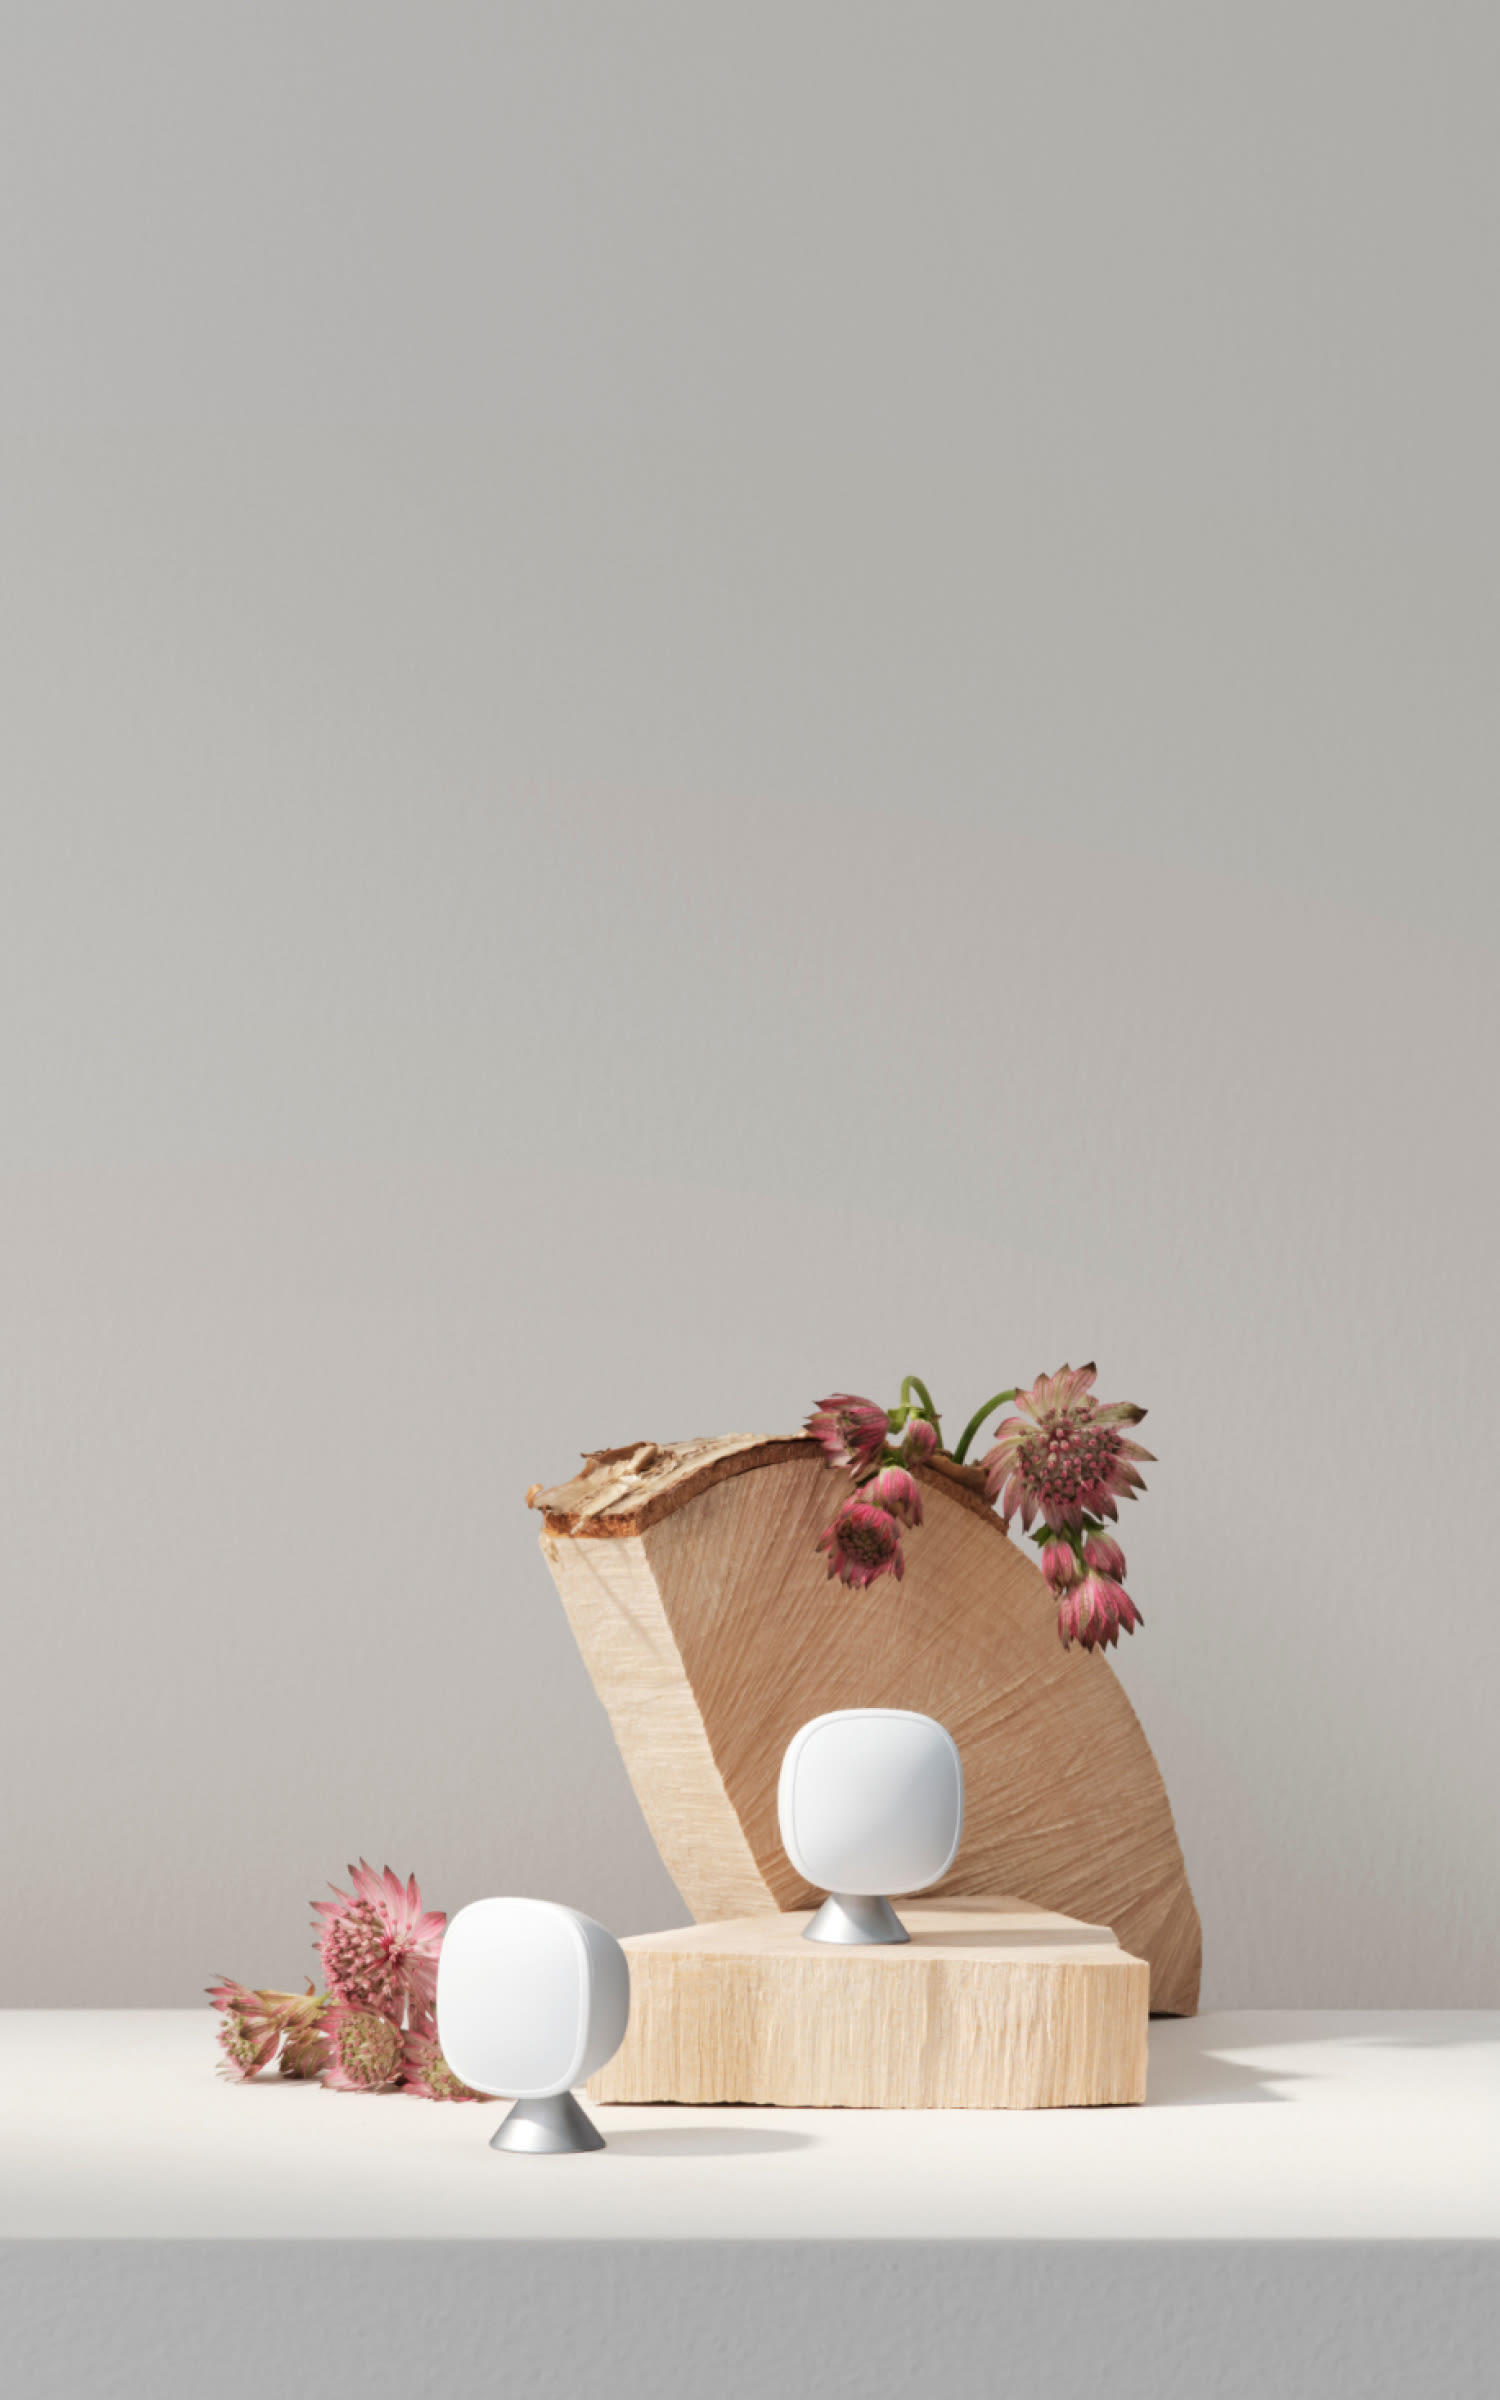 Two SmartSensors in still life scene with wooden blocks and dried flowers on grey background.